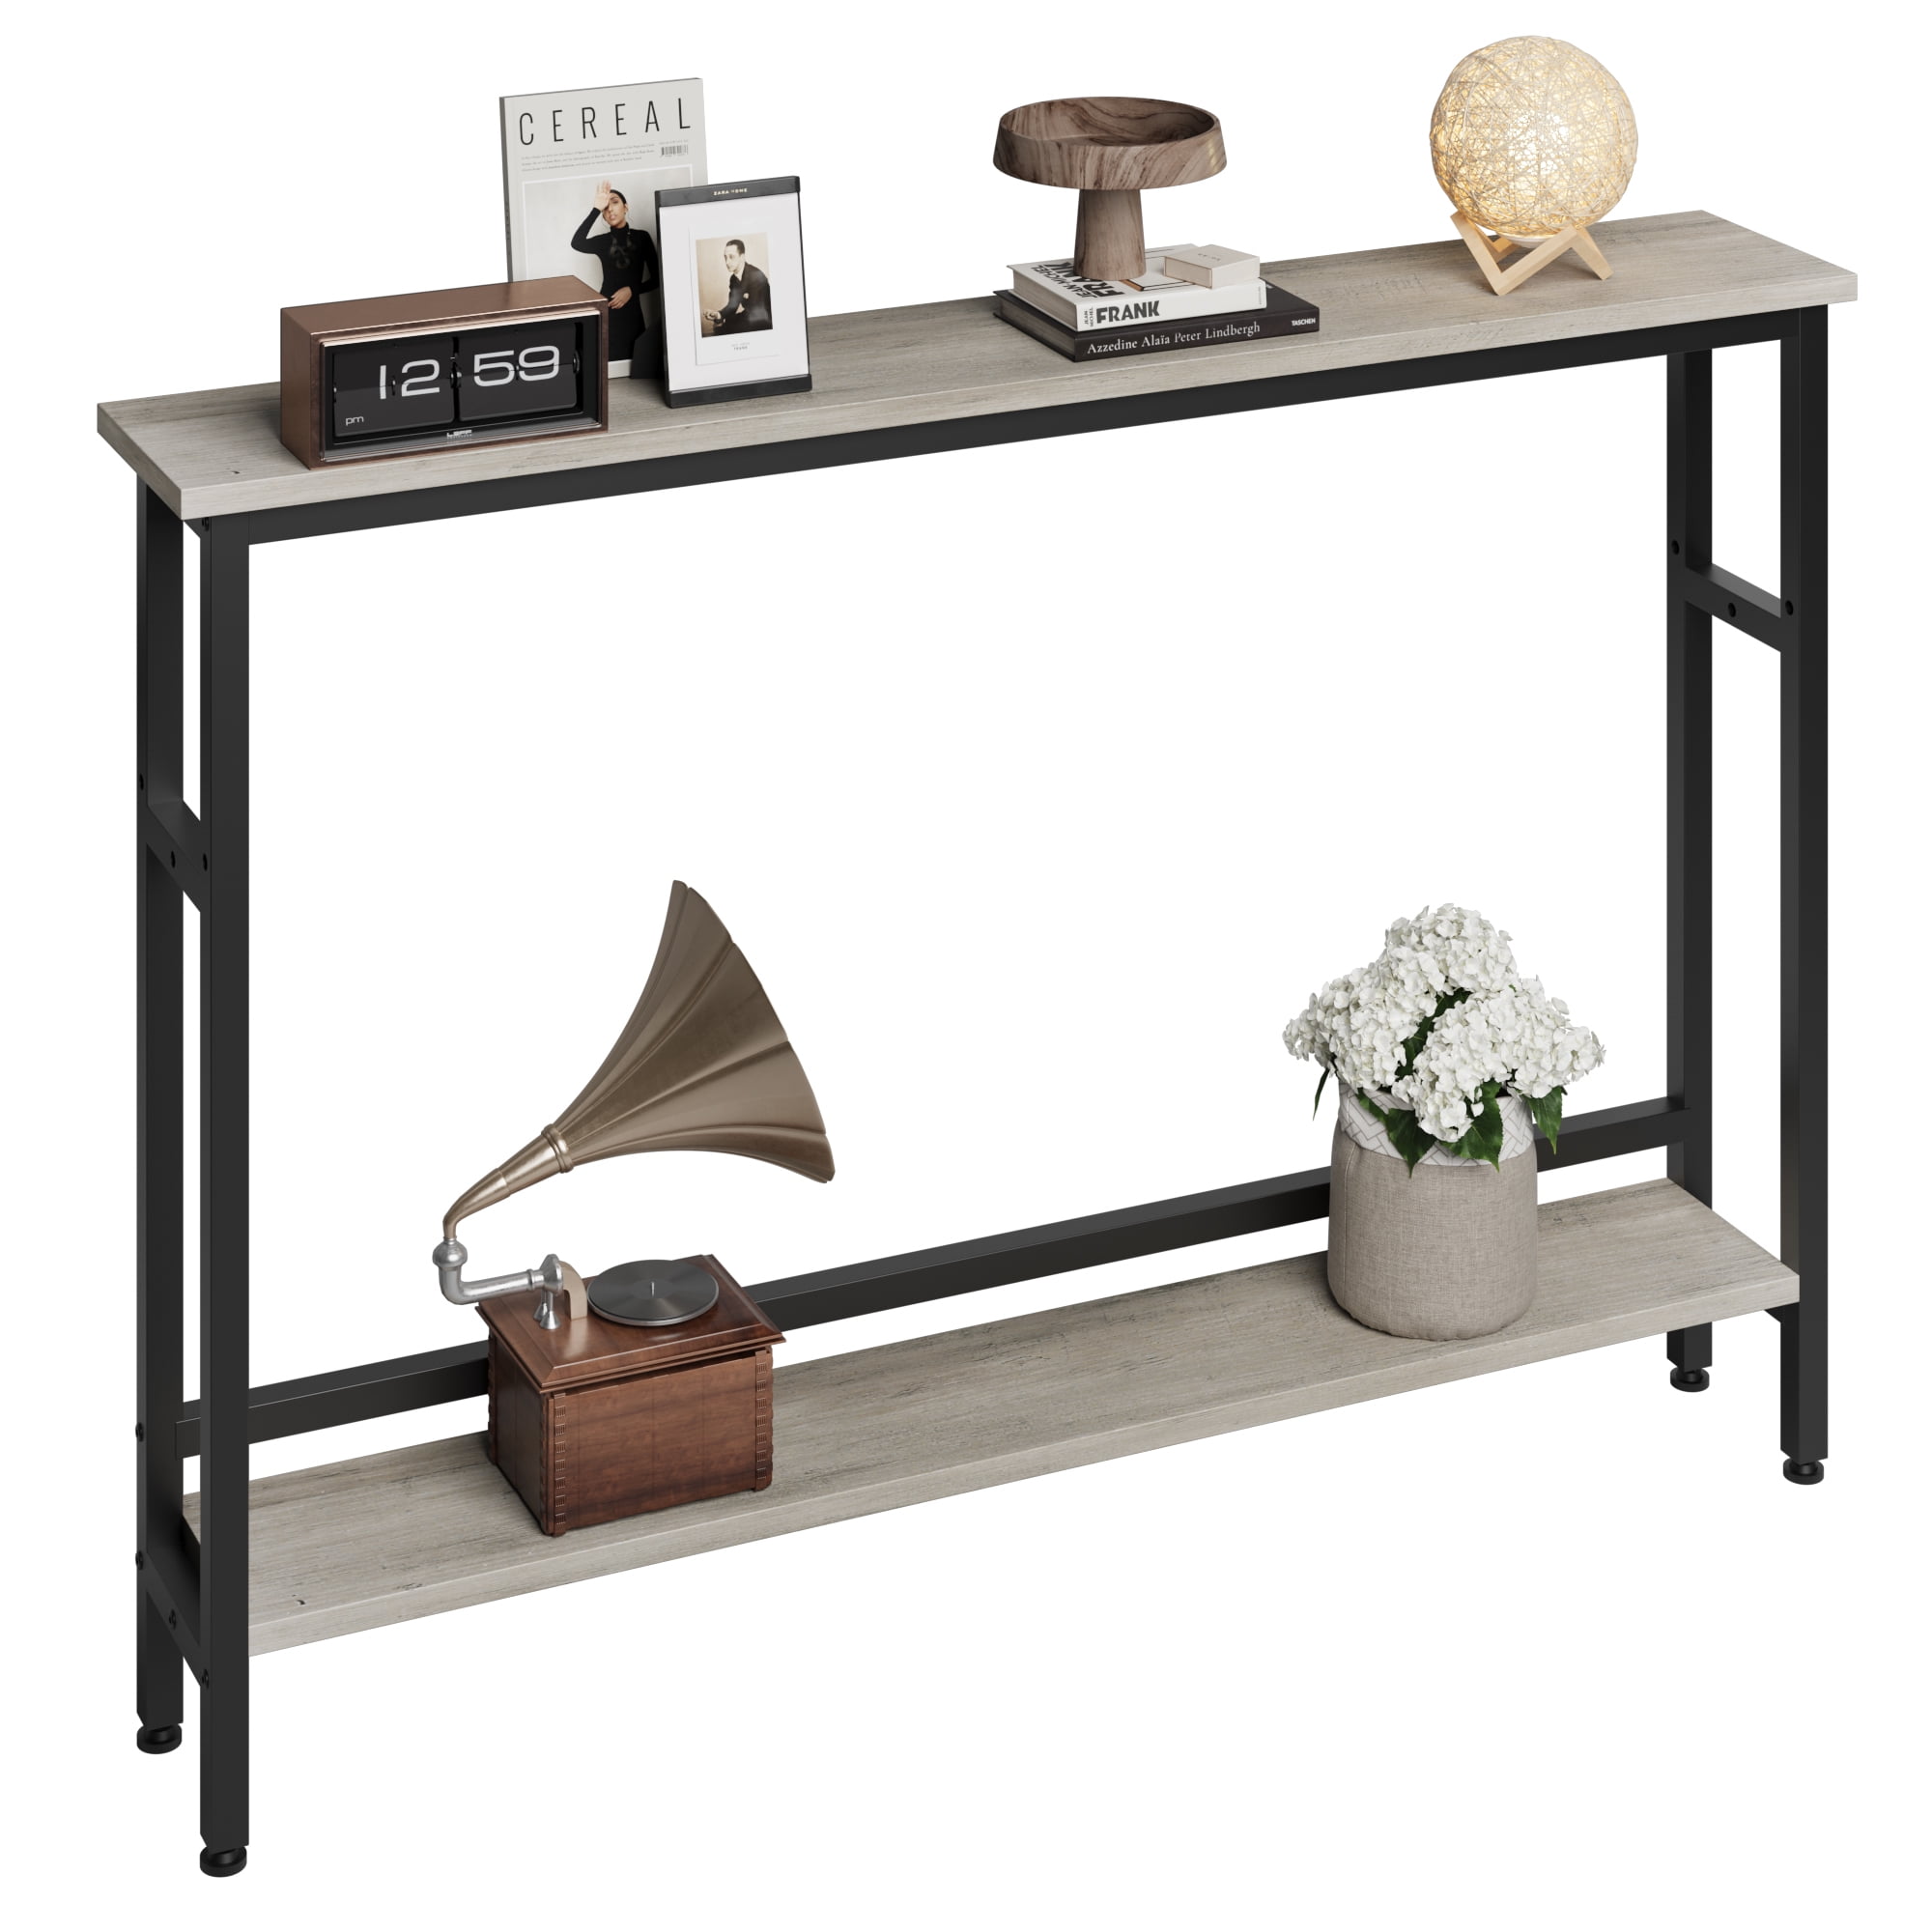 WhizMax Narrow Console Table, 70.8 Inch Sofa Table with Adjustable